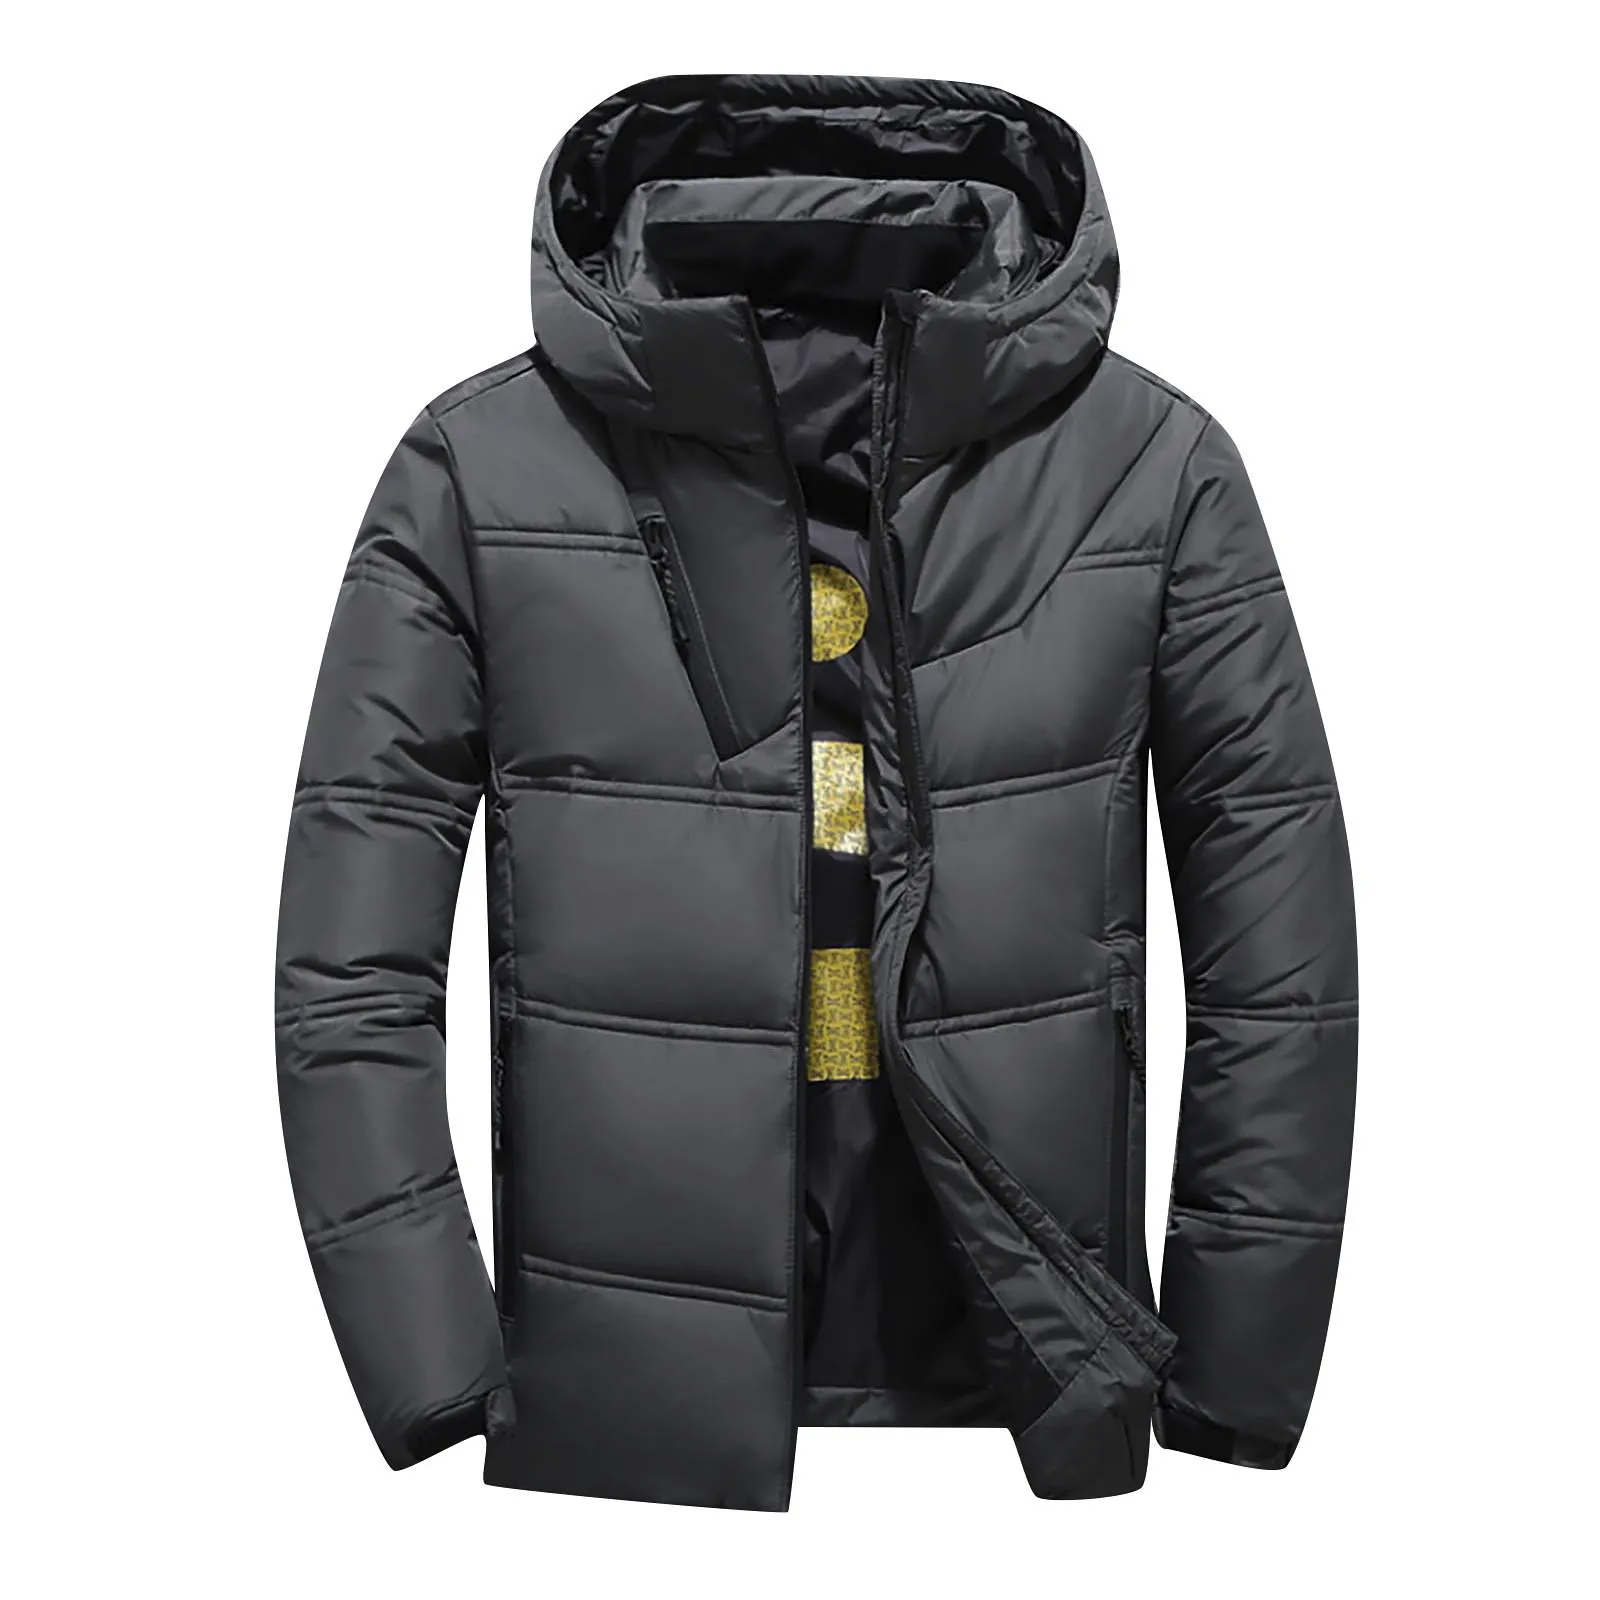 stone island jacket Fashion Men's Autumn And Winter Loose Solid Colors Long Sleeve Cotton Padded Coat Casual Jacket Outerwear Chaquetas Hombre#g3 waterproof jacket